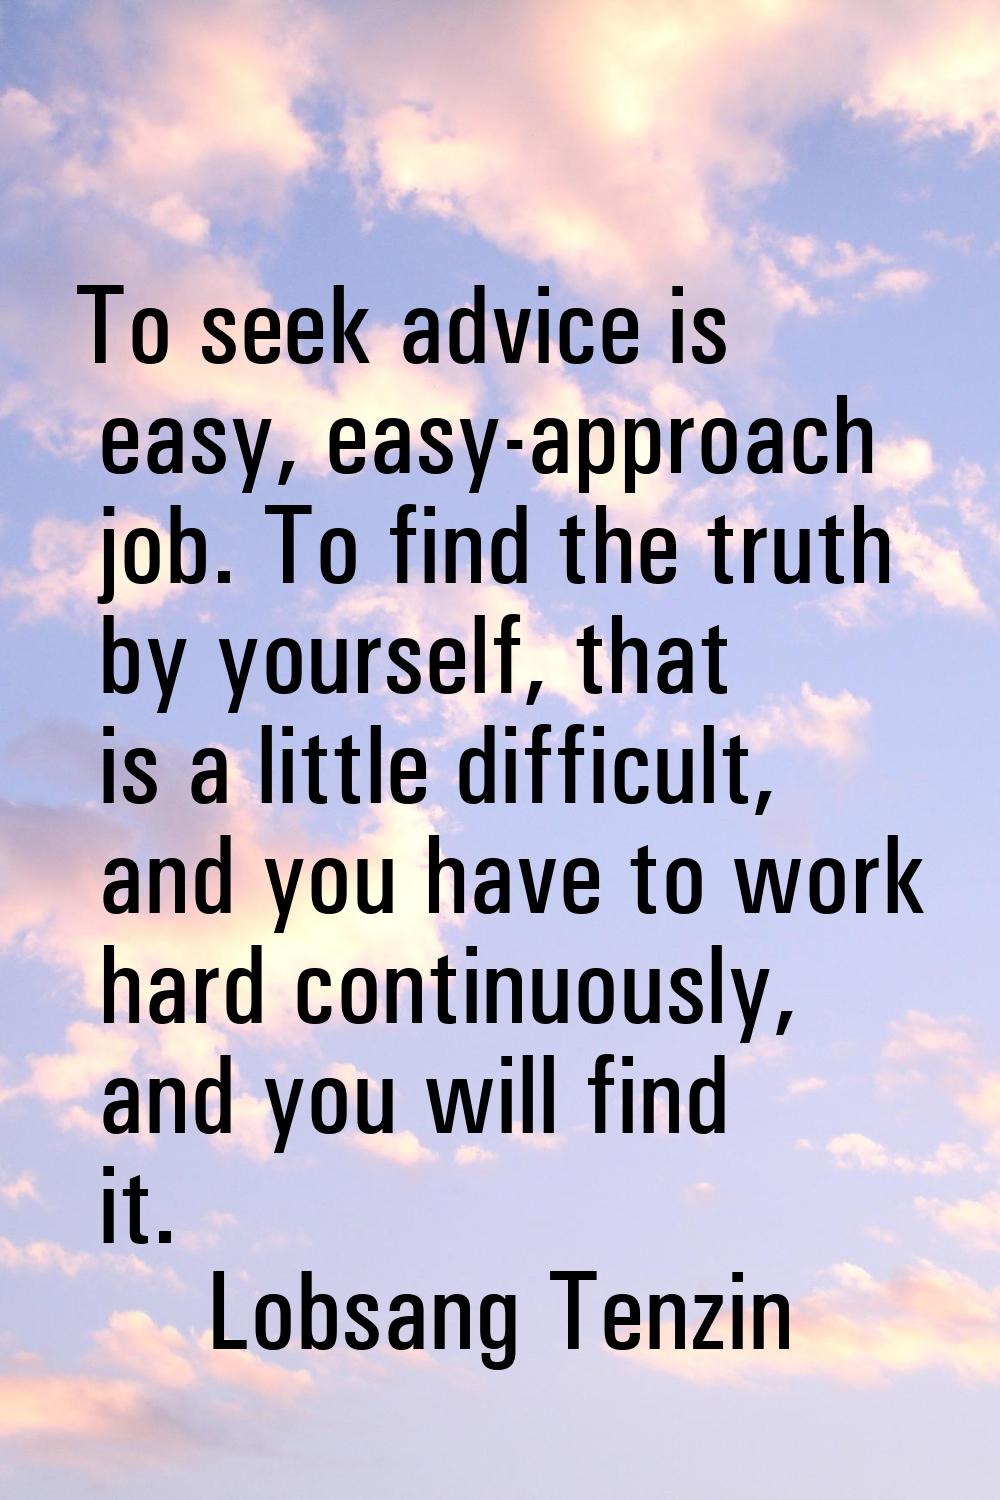 To seek advice is easy, easy-approach job. To find the truth by yourself, that is a little difficul